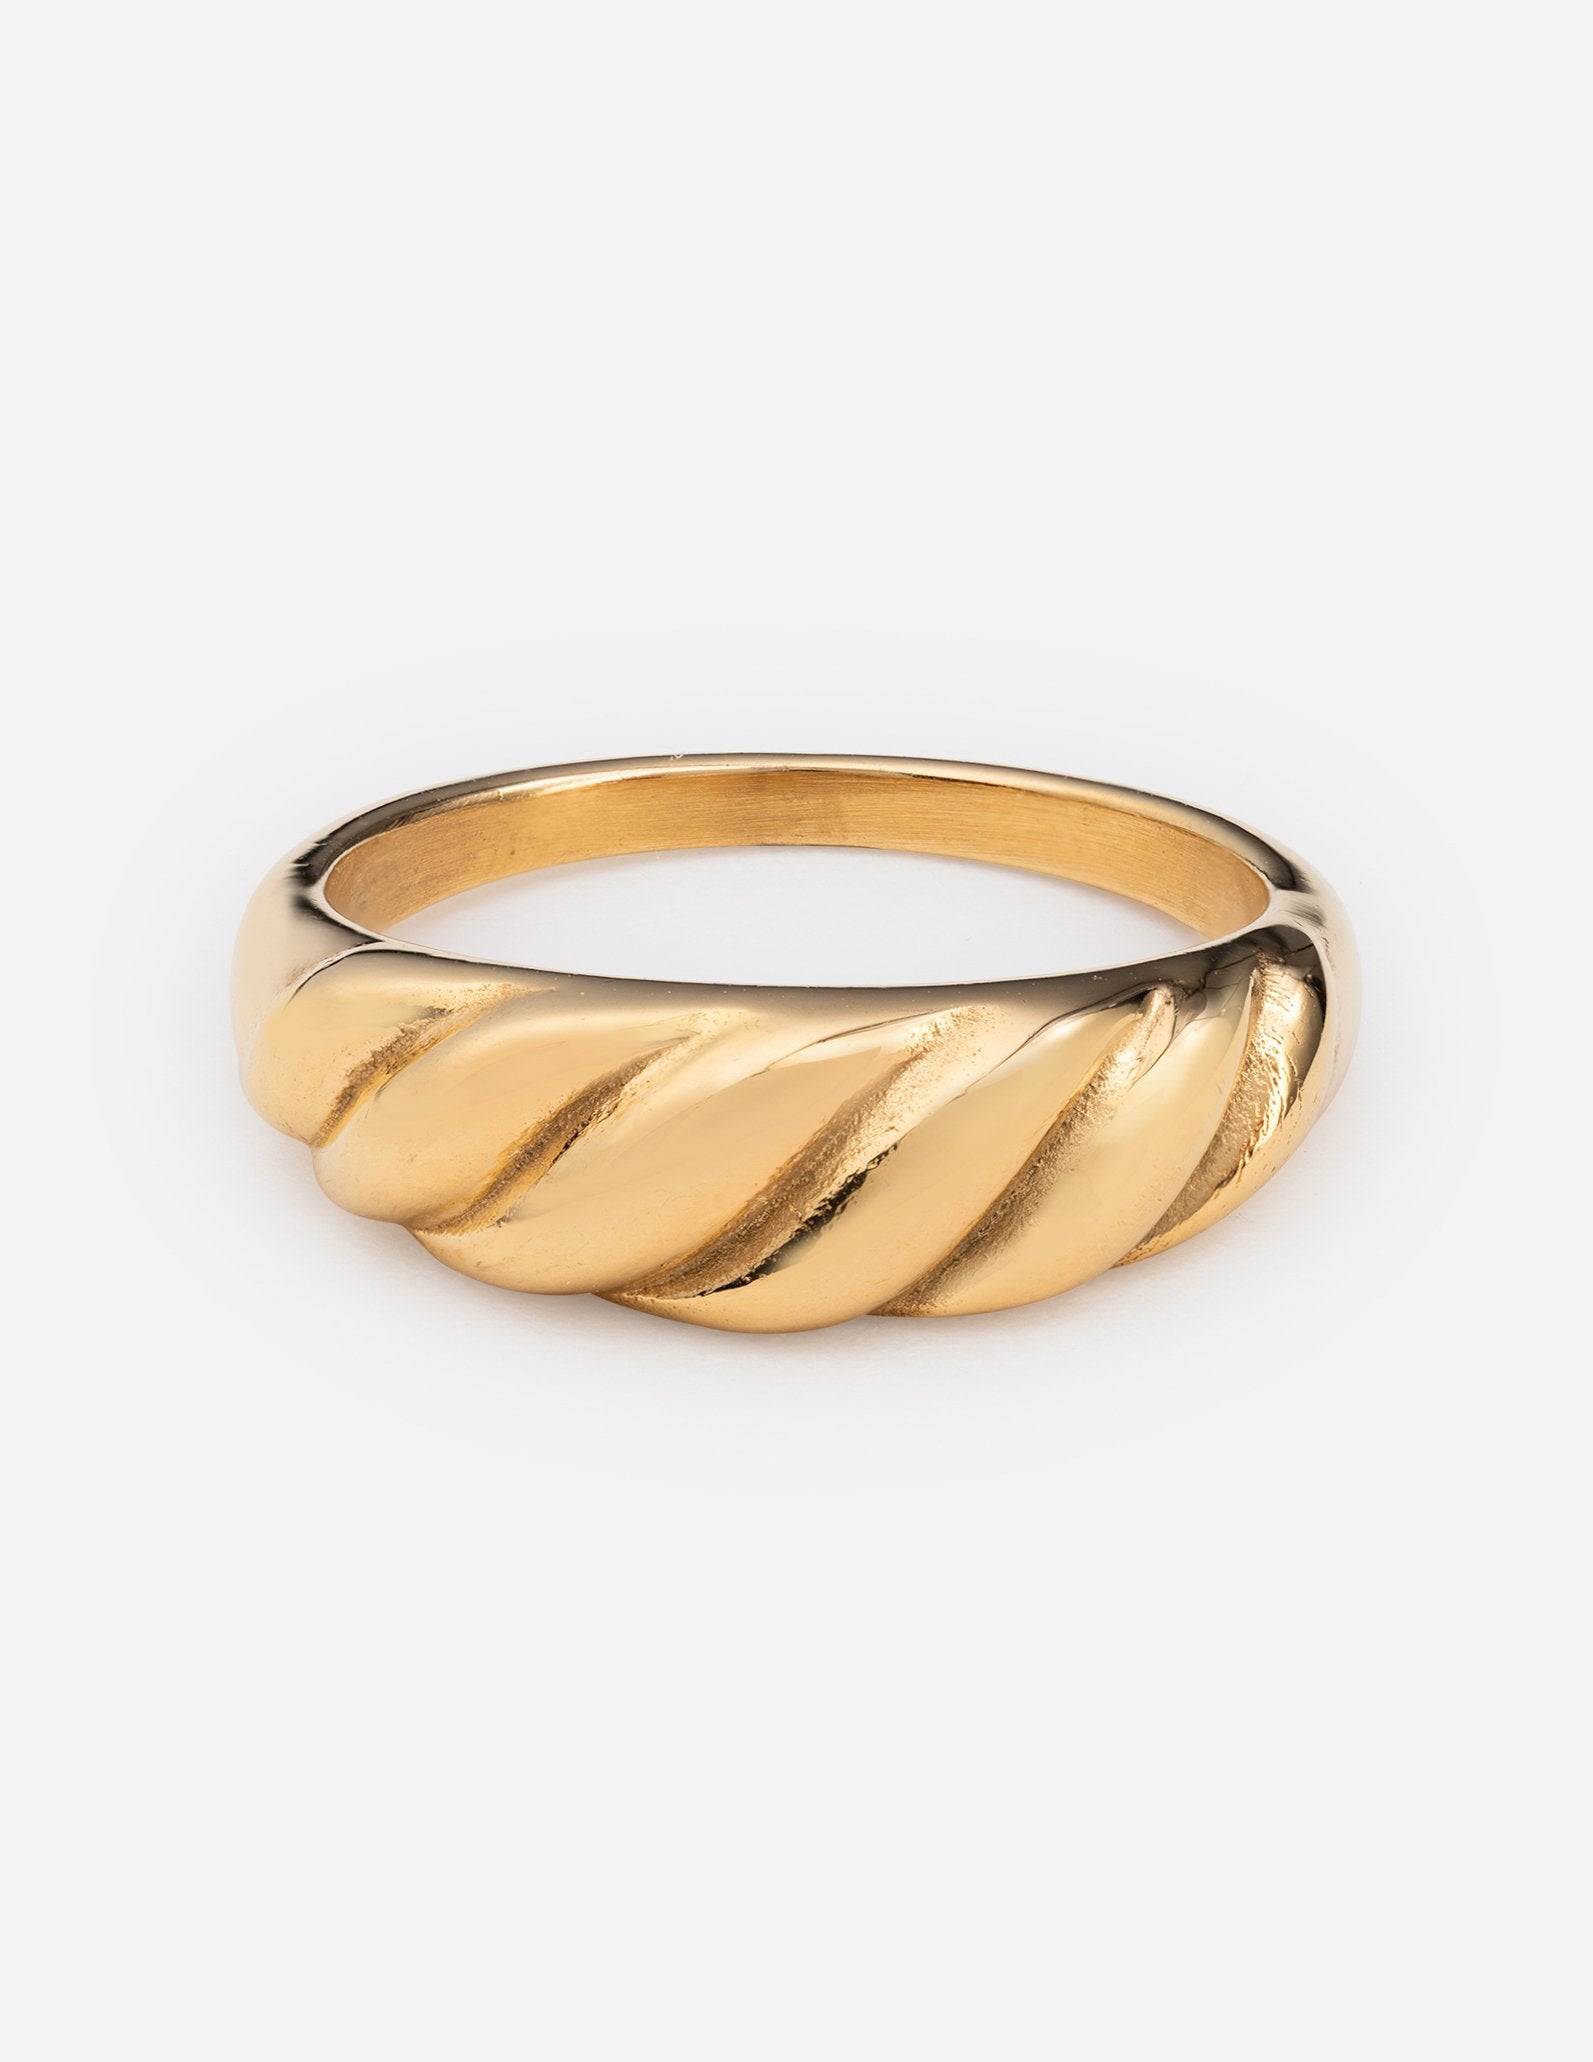 Christian Bauer 14k Yellow Gold 5 mm Wedding Band | Robbins Brothers